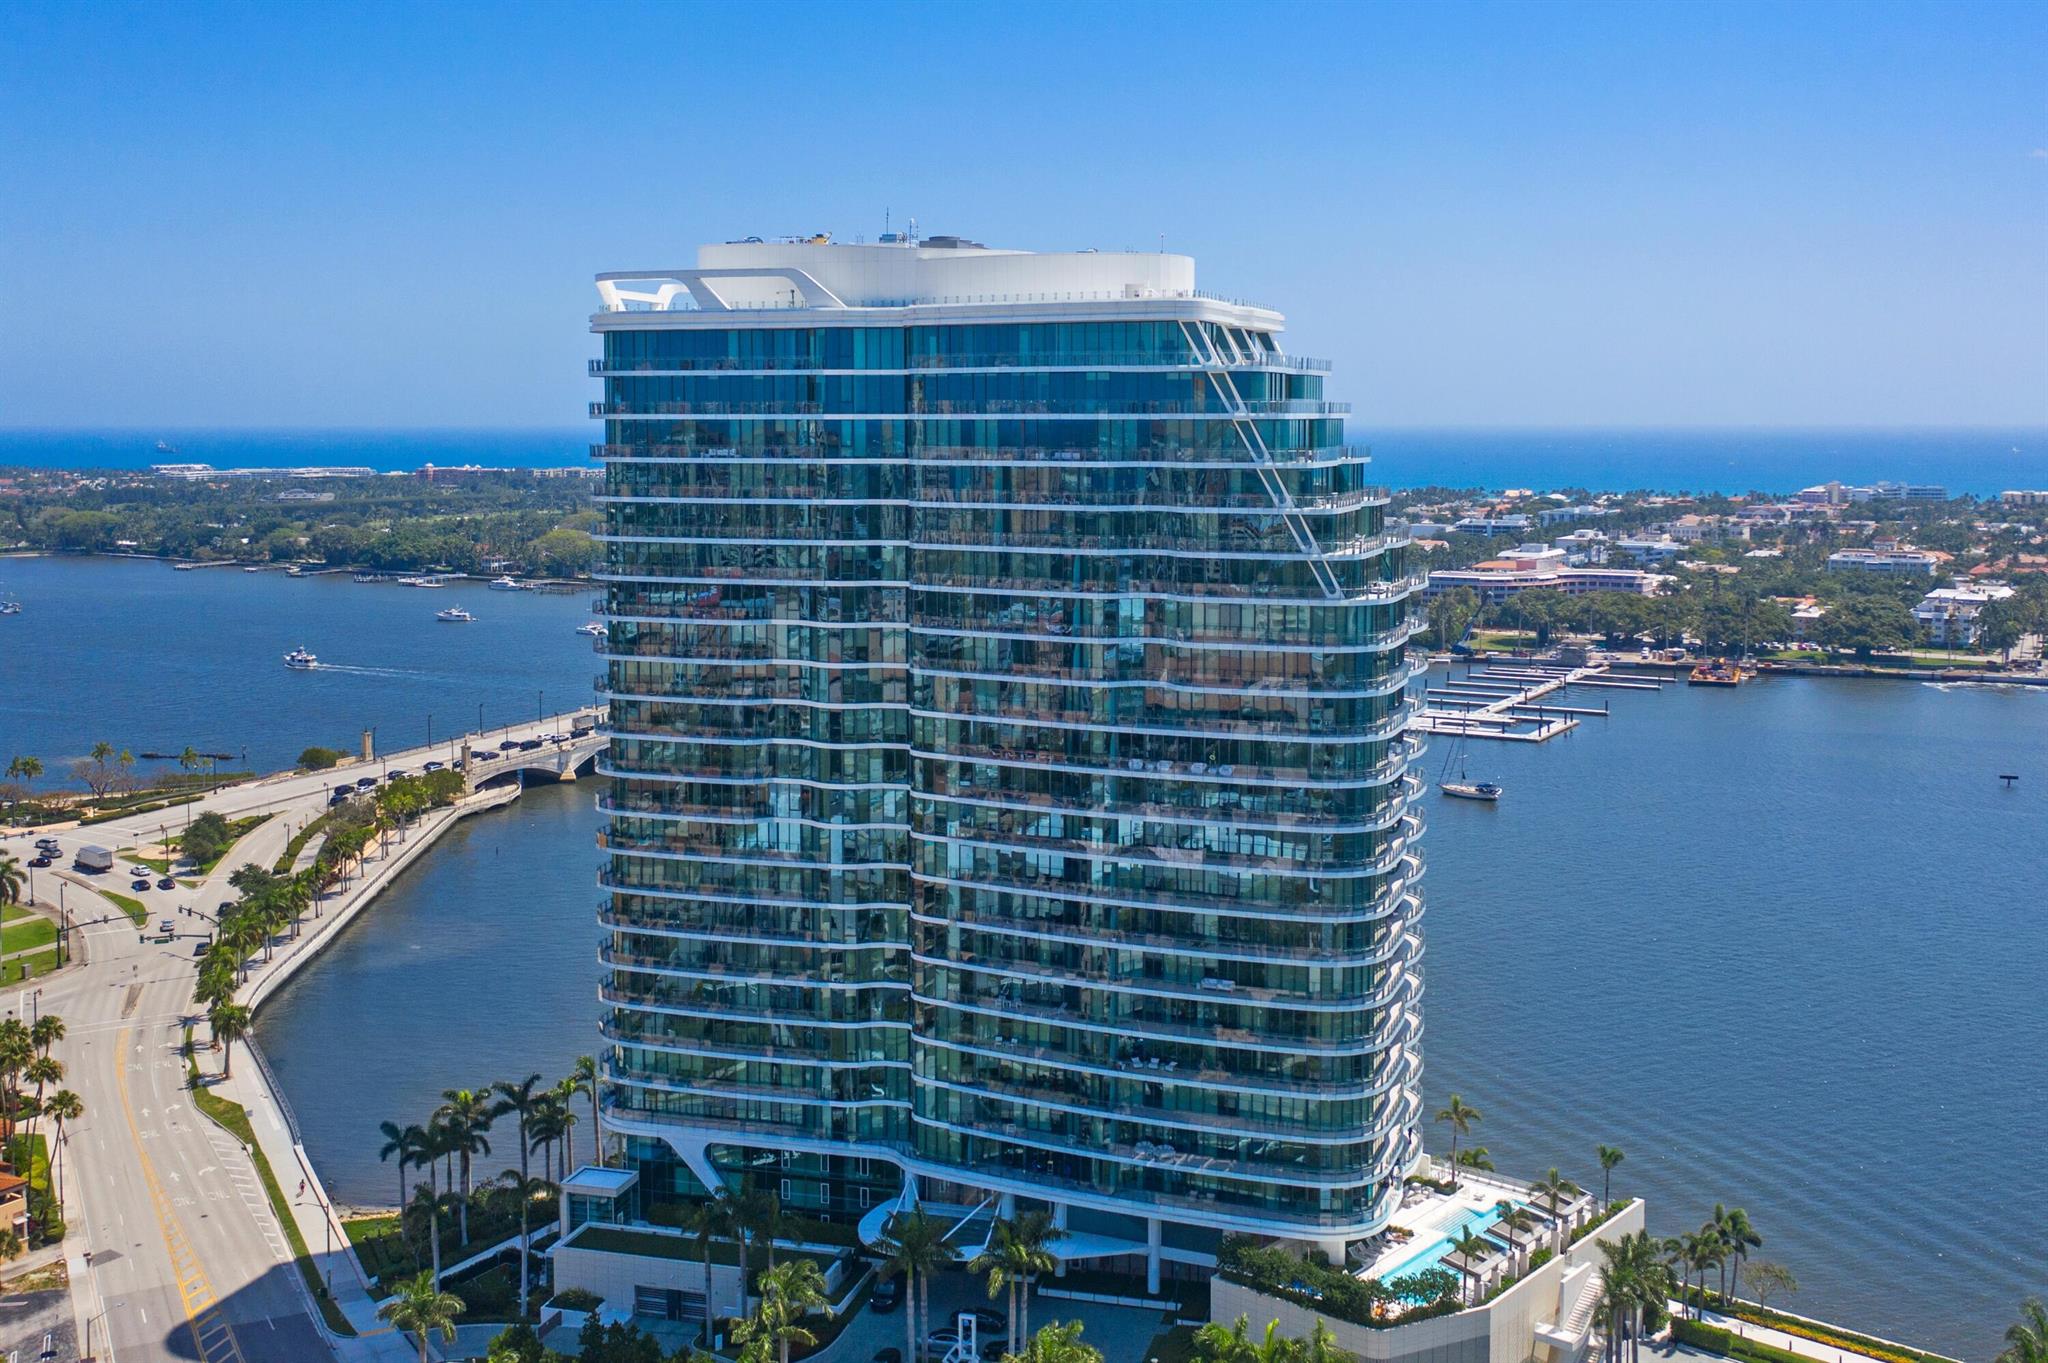 The Bristol stands proudly as a prestigious landmark in the heart of Downtown West Palm Beach, showcasing itself as an architectural masterpiece that seamlessly fuses sleek modern design with timeless elegance. This exclusive 3 bedroom, 3.5 bathroom condominium epitomizes panoramic ocean views, lavish interior finishes, and an unwavering commitment to detail. Top-tier Chef's kitchen with Gaggenau appliances and Italian marble flooring, ensuring a premium living experience. The Bristol is also dedicated to delivering round-the-clock services, guaranteeing an unparalleled lifestyle. Revel in the convenience of 24-hour concierge service, access to a well-appointed fitness center, a private salon and the prestige of communal spaces designed for the most discerning residents.